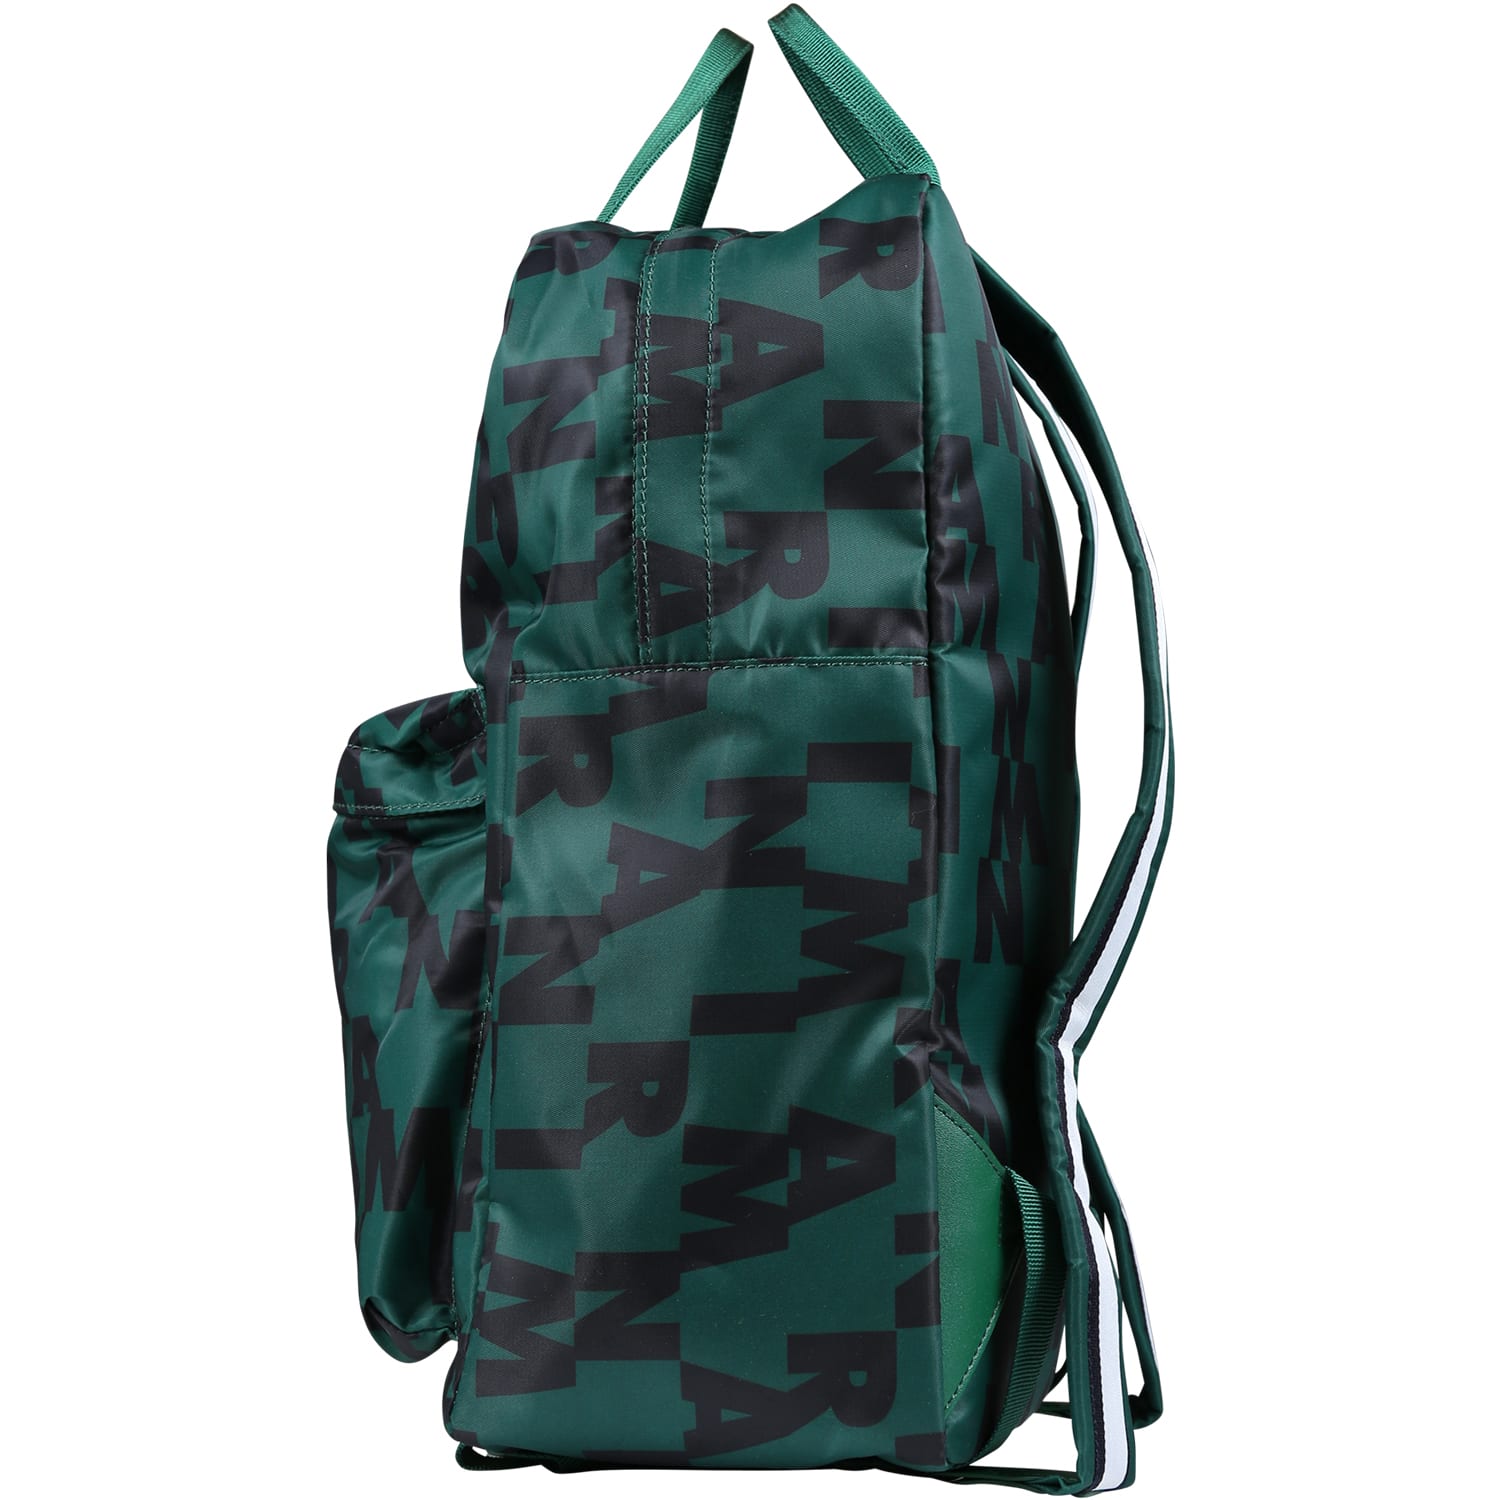 Green backpack with all-over Marni logo